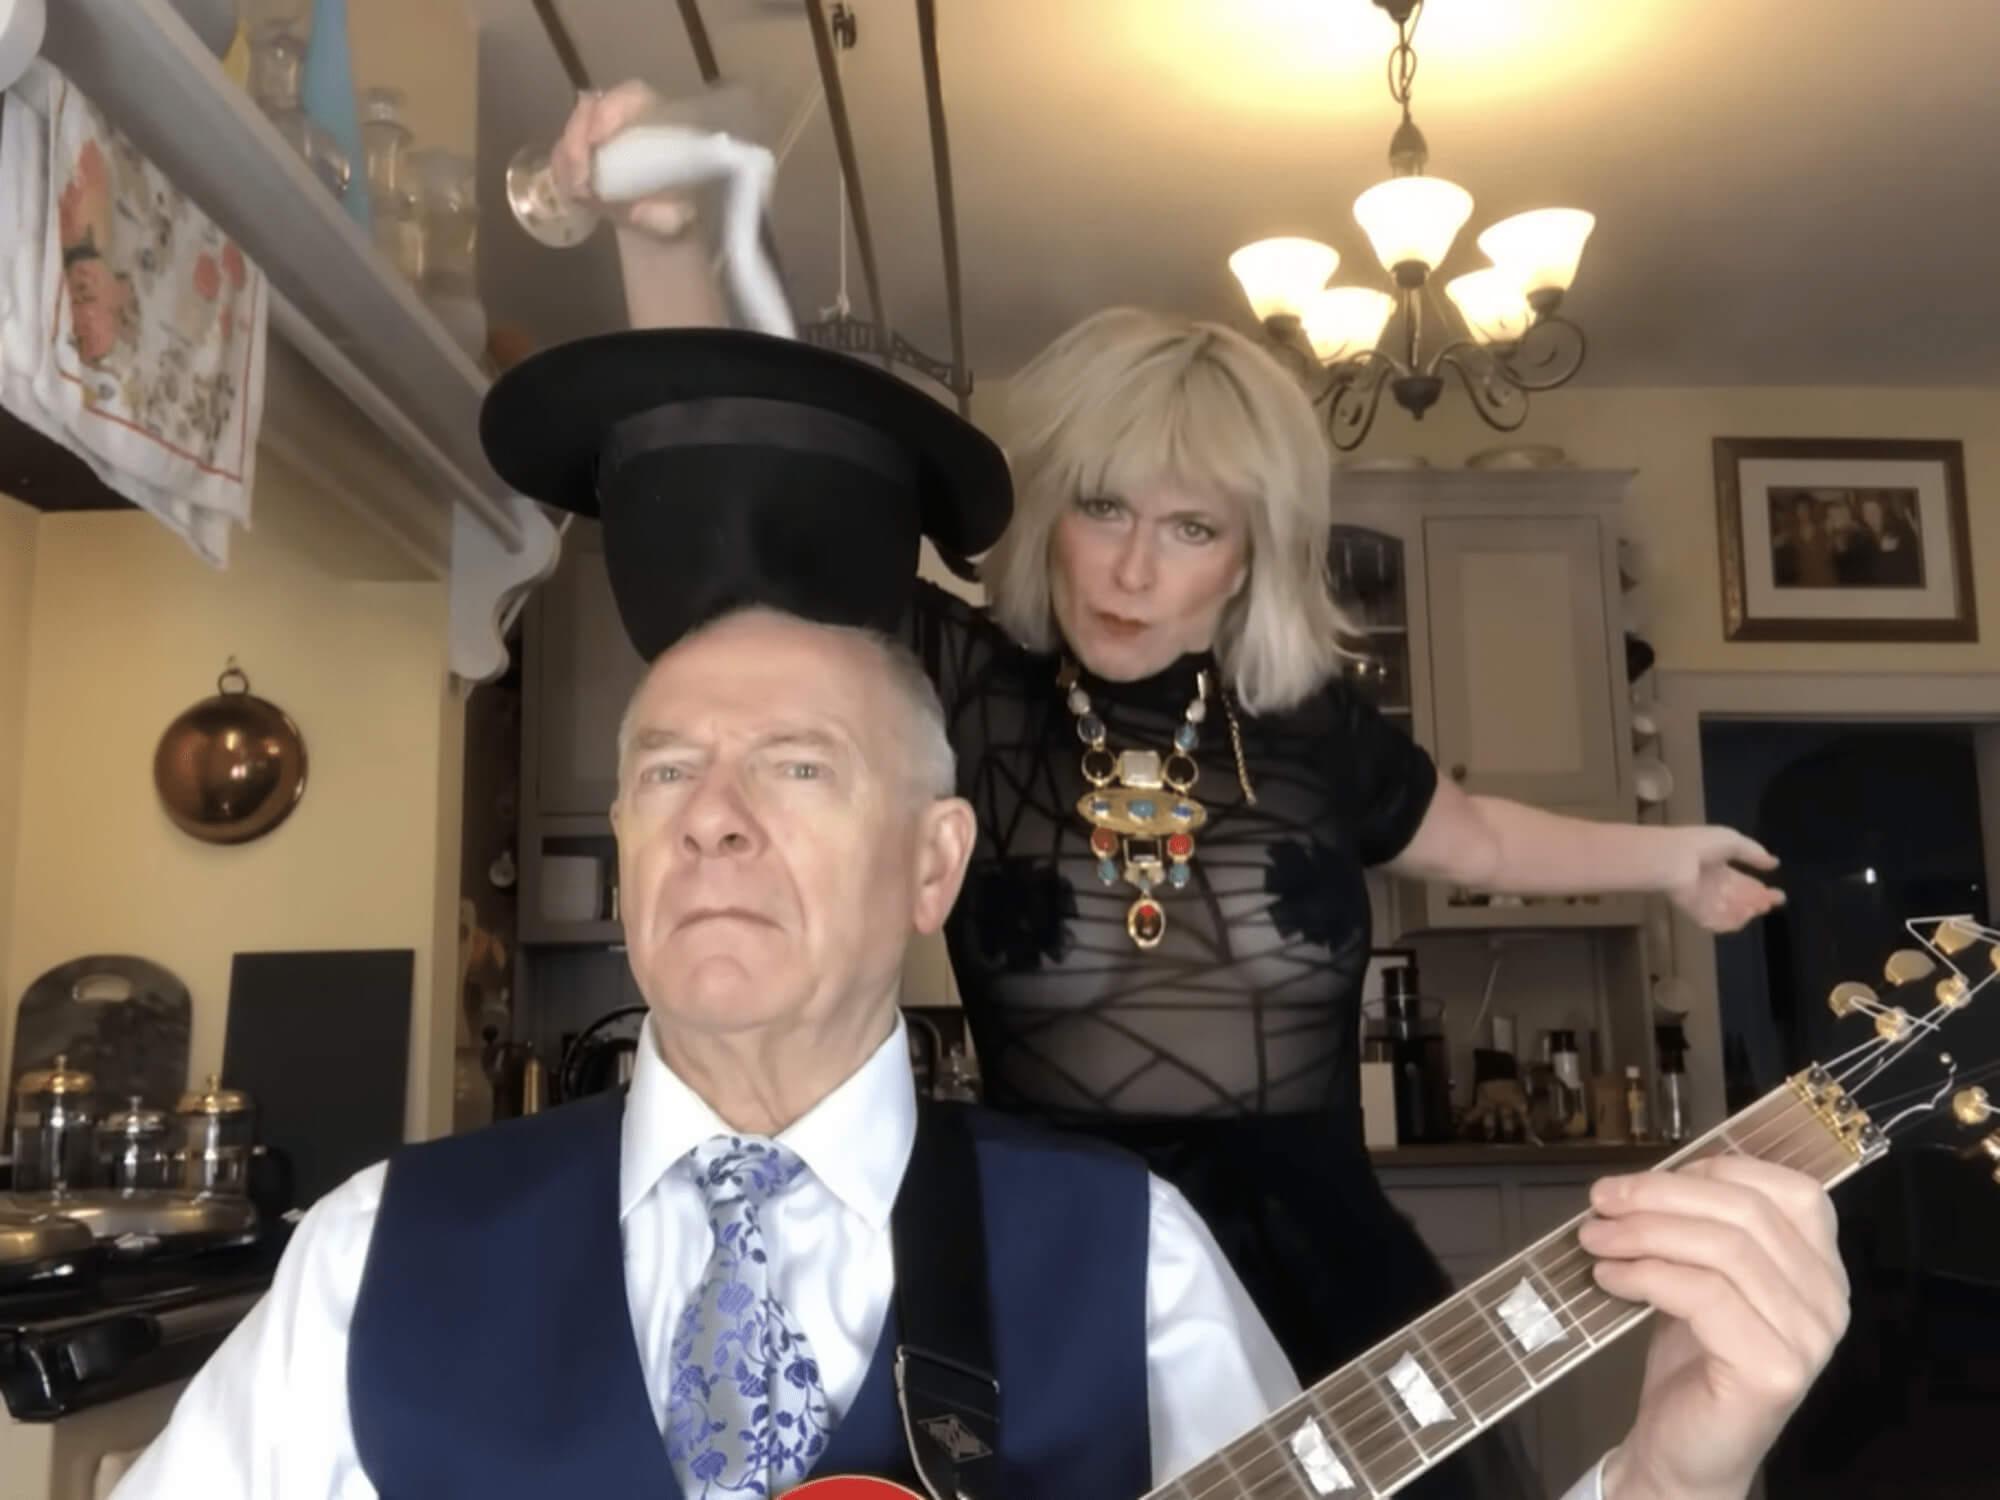 Sunday Lunch Cover of Sensational by Toyah